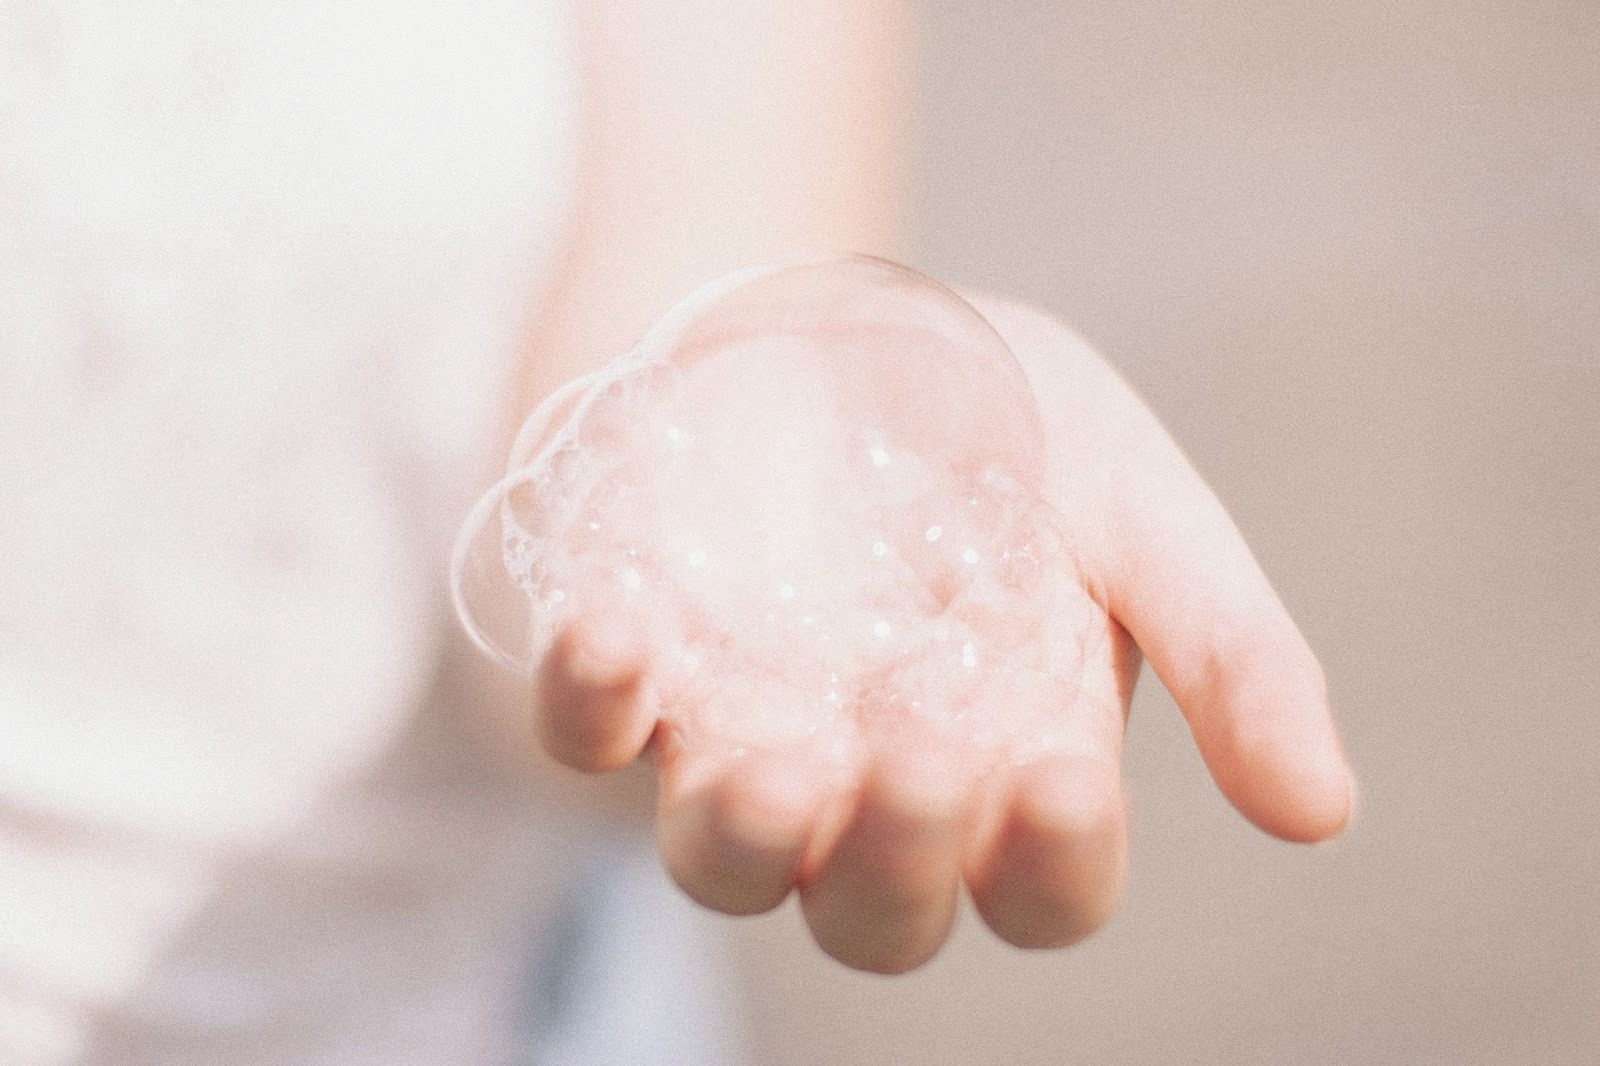 Why Consider Switching To Safer Non-Toxic Hand Soap